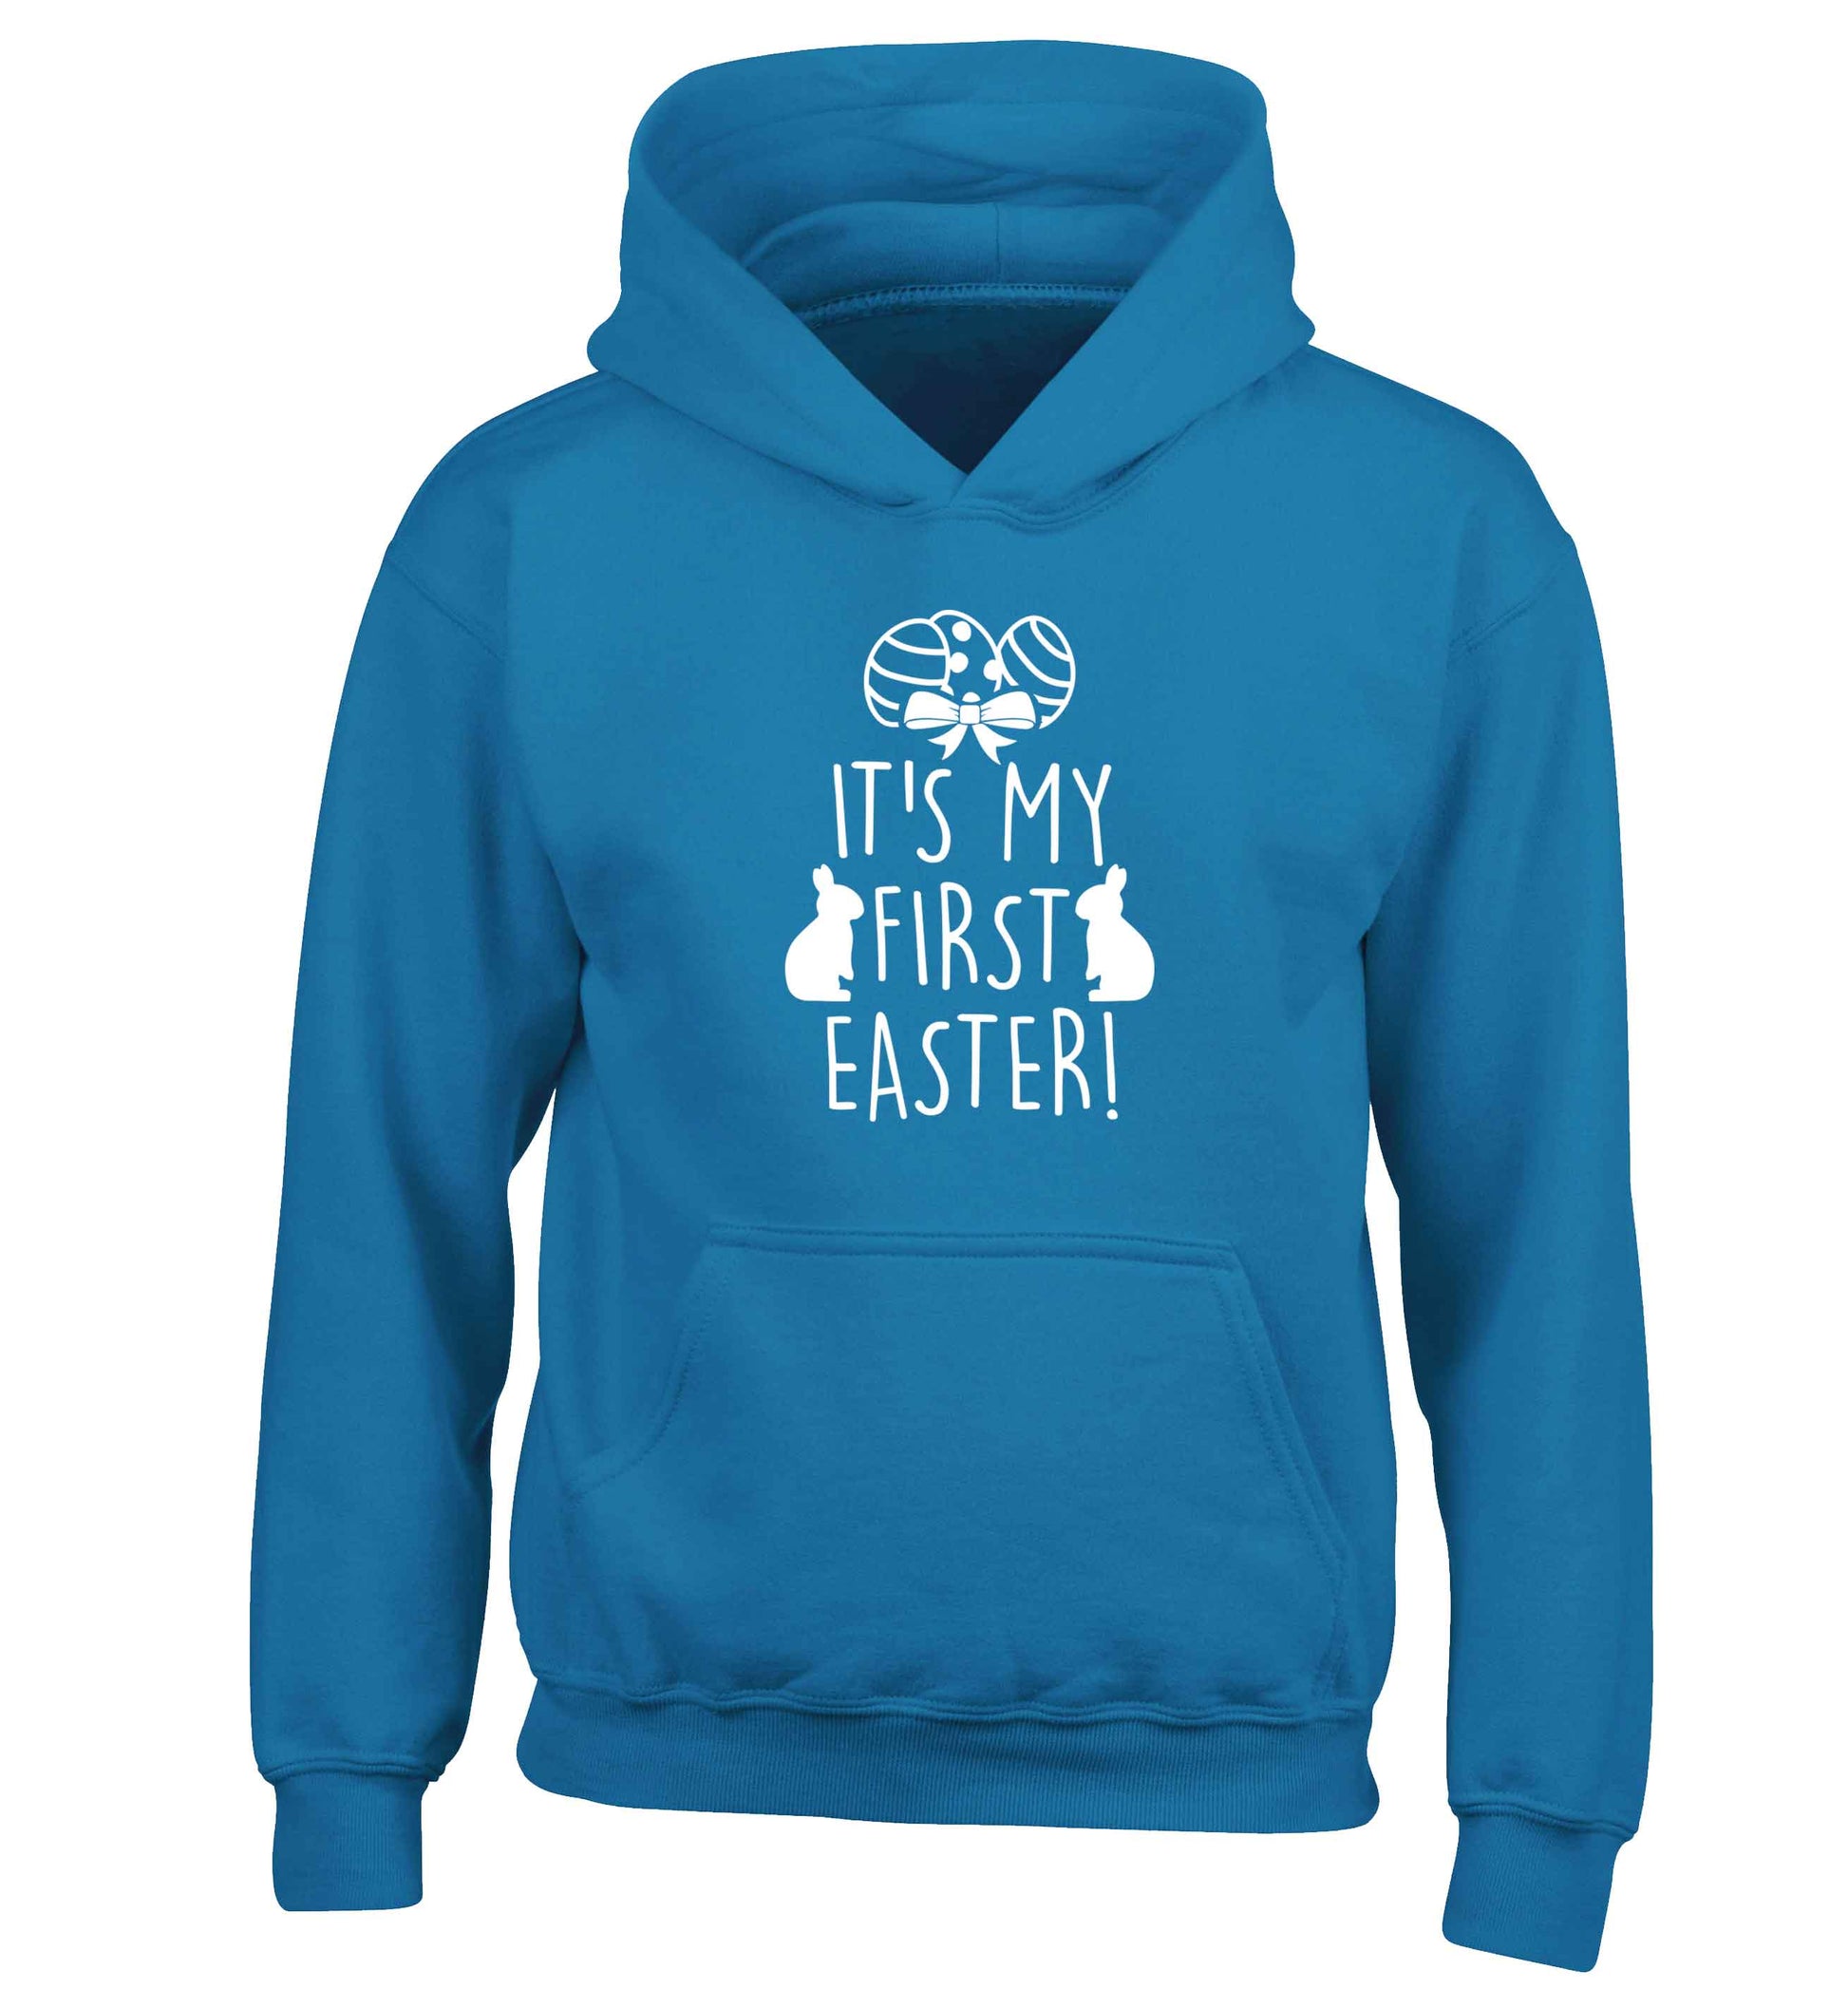 It's my first Easter children's blue hoodie 12-13 Years